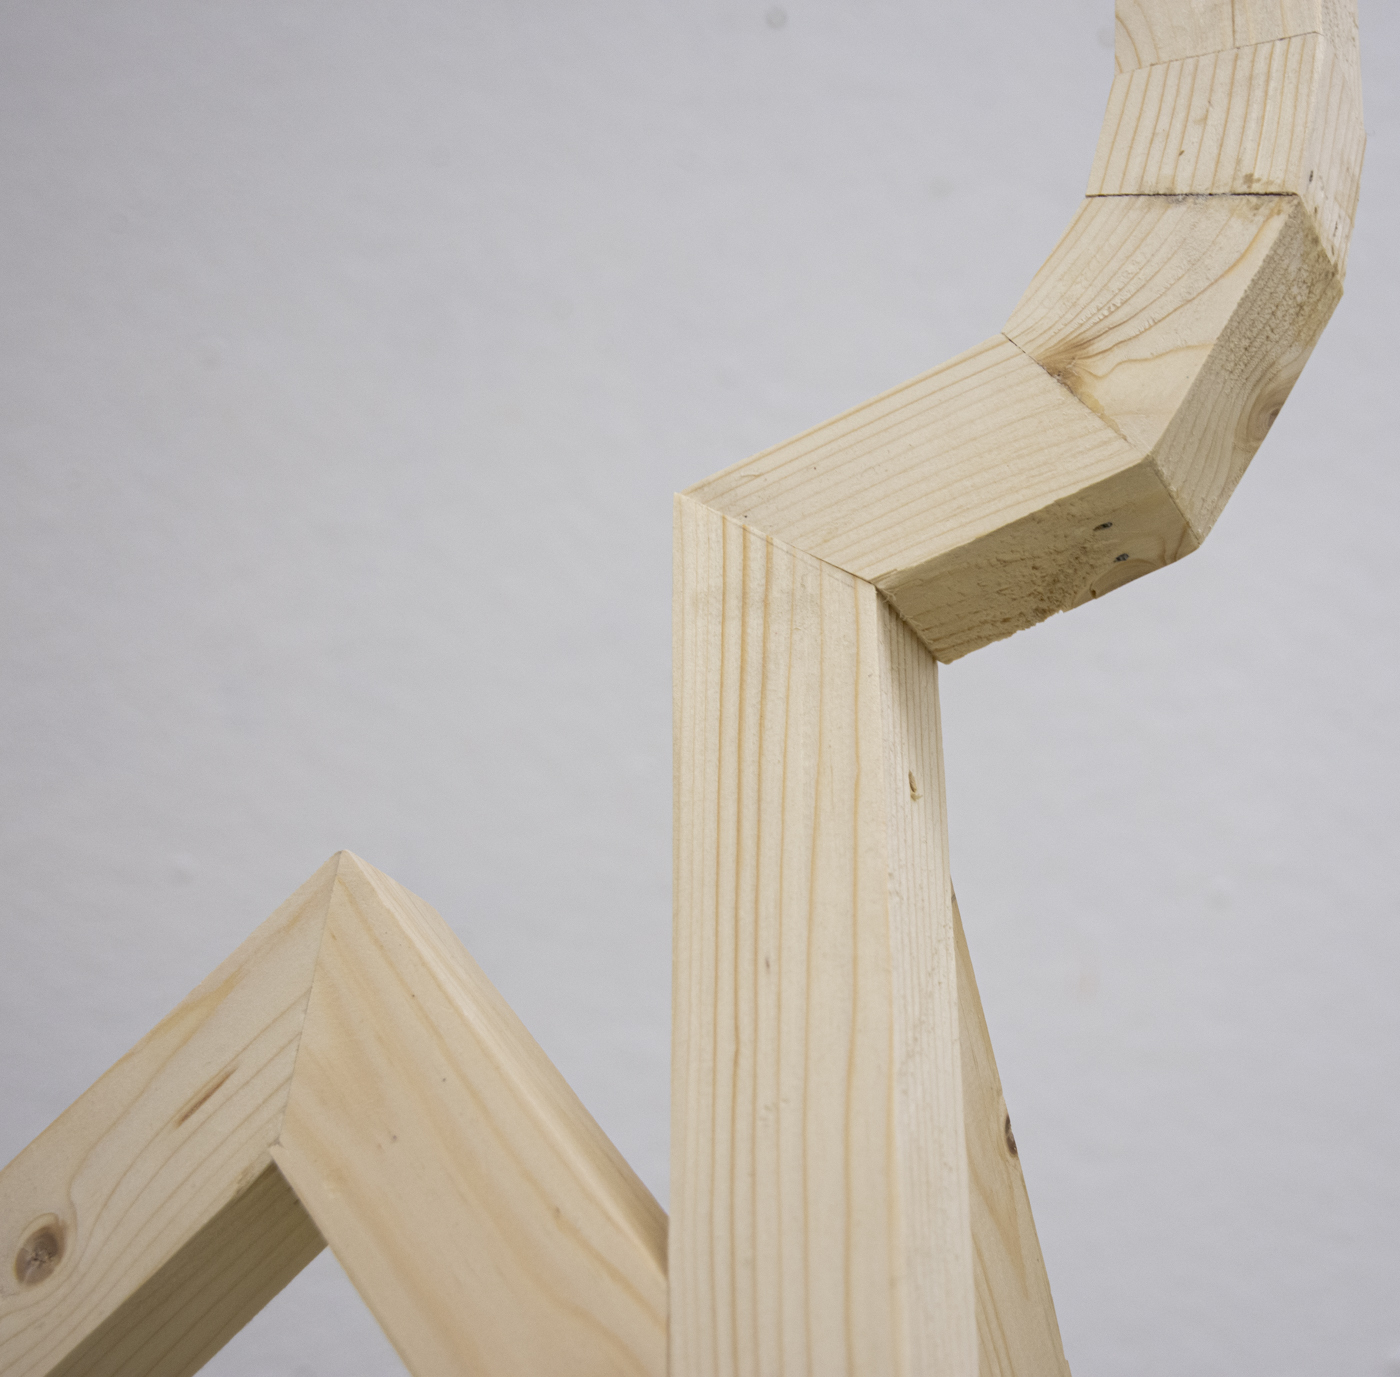 a close-up image of wooden pieces joined together.